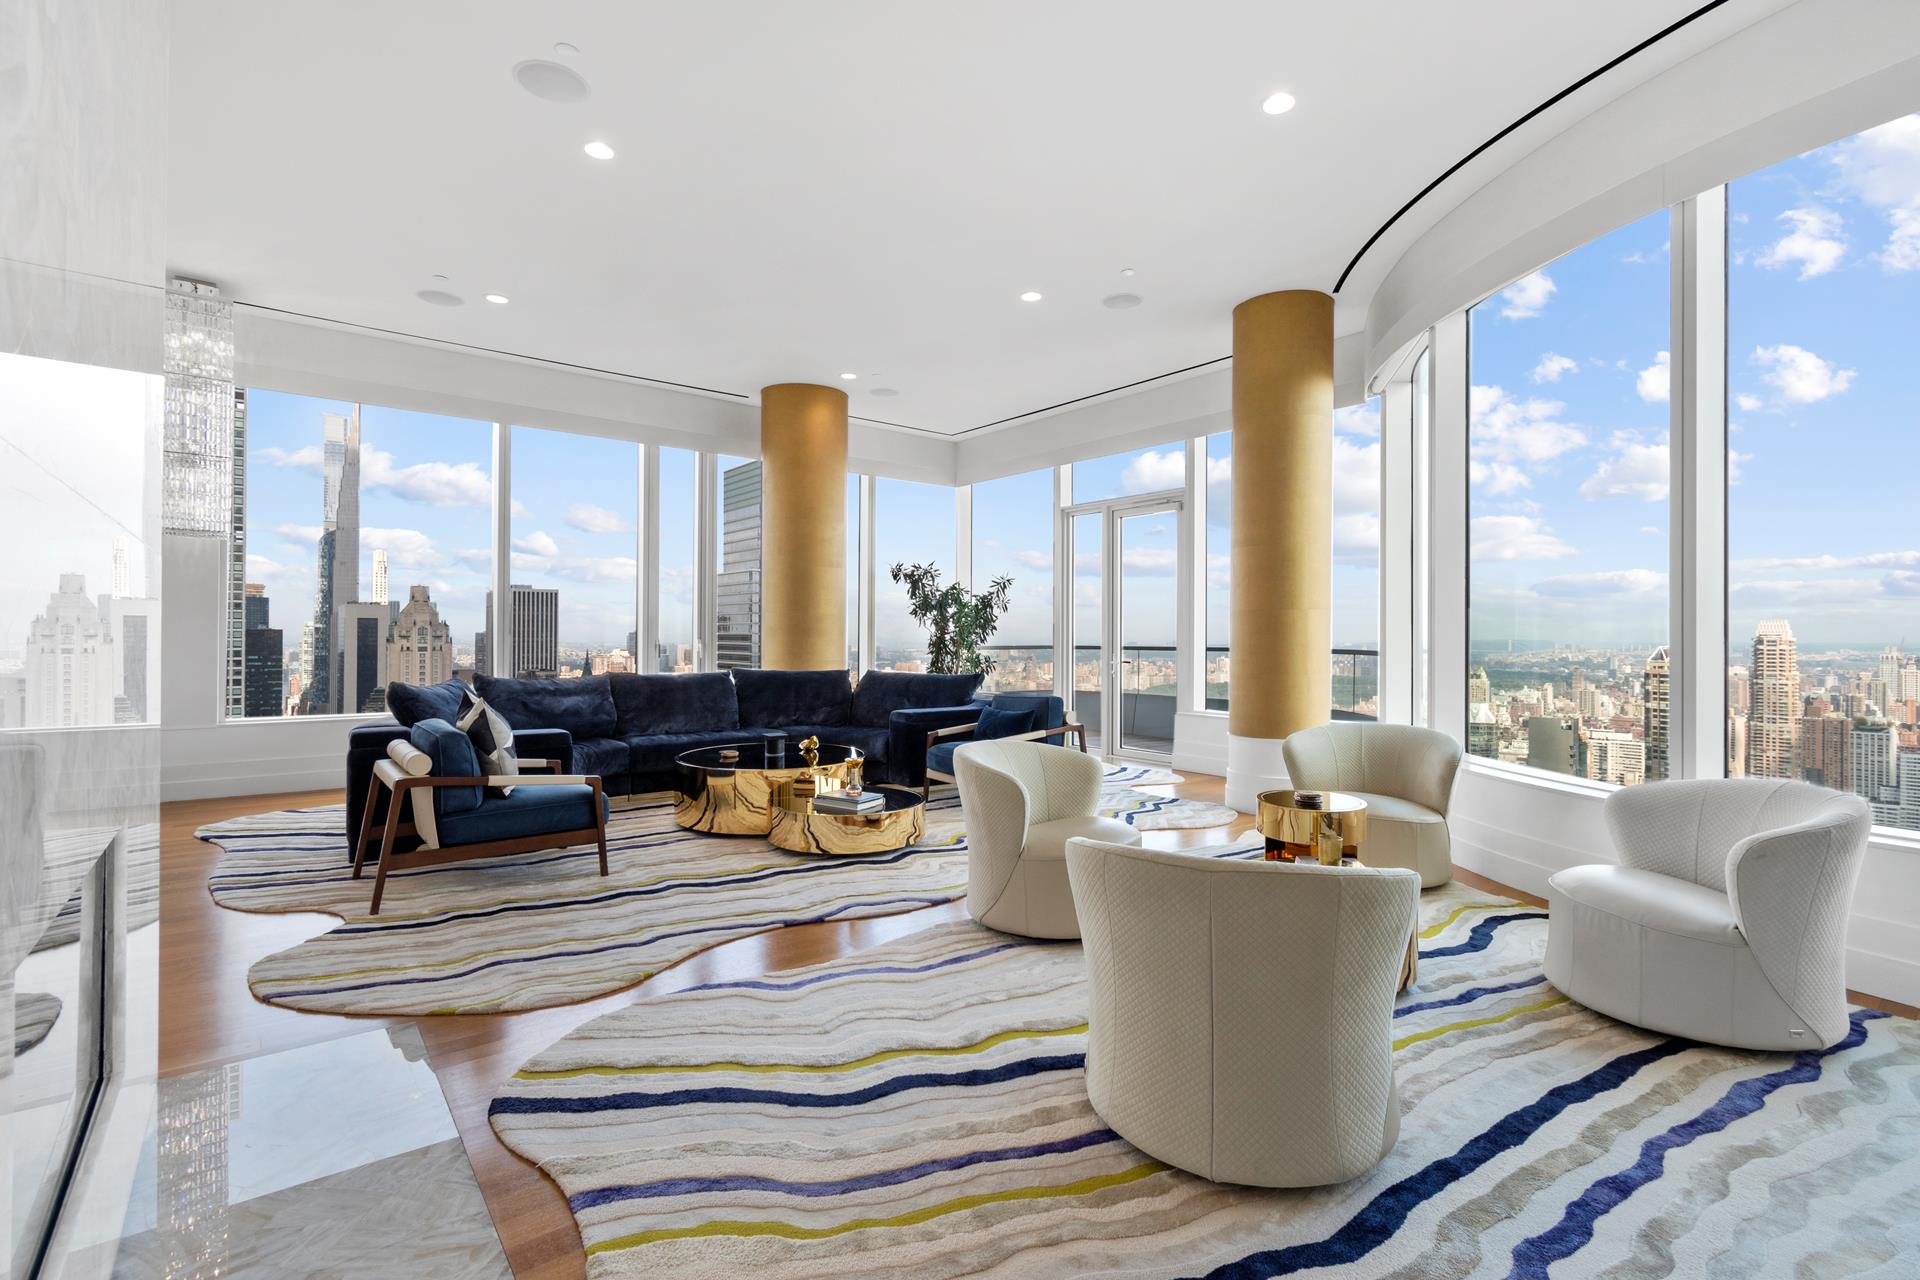 252 East 57th Street 62A, Sutton, Midtown East, NYC - 5 Bedrooms  
6.5 Bathrooms  
8 Rooms - 